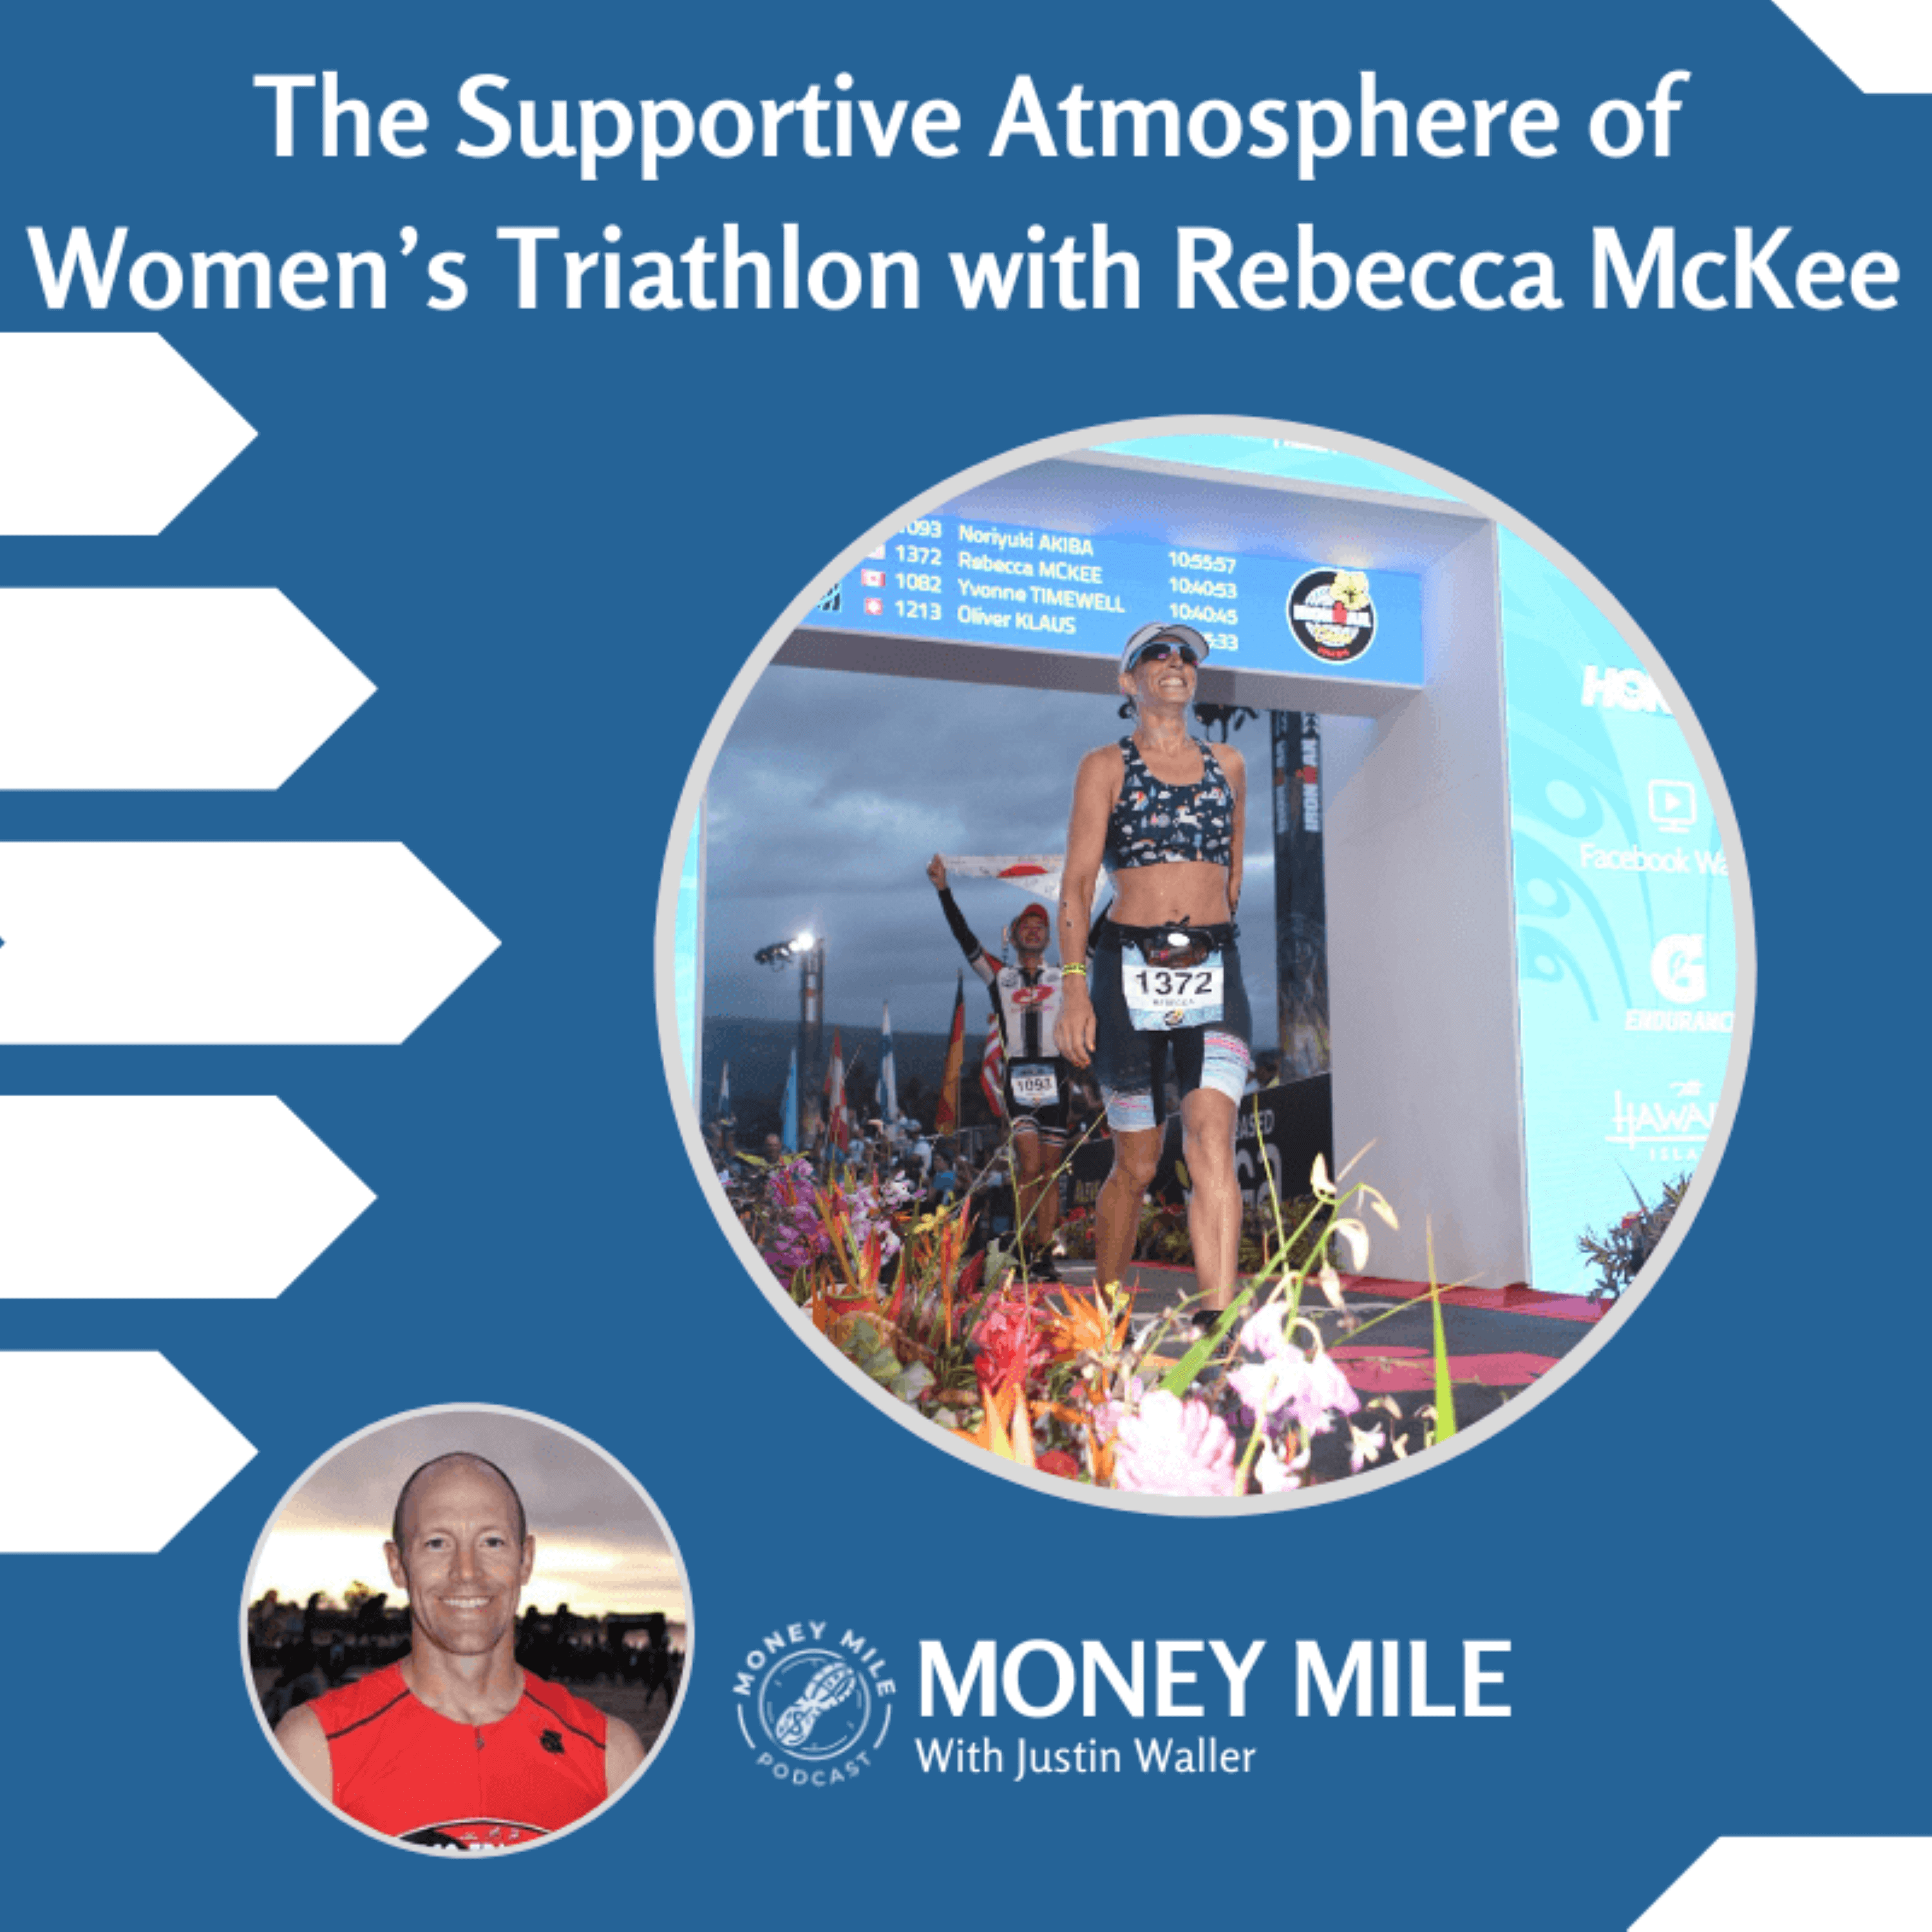 The Supportive Atmosphere of Women’s Triathlon with Rebecca McKee